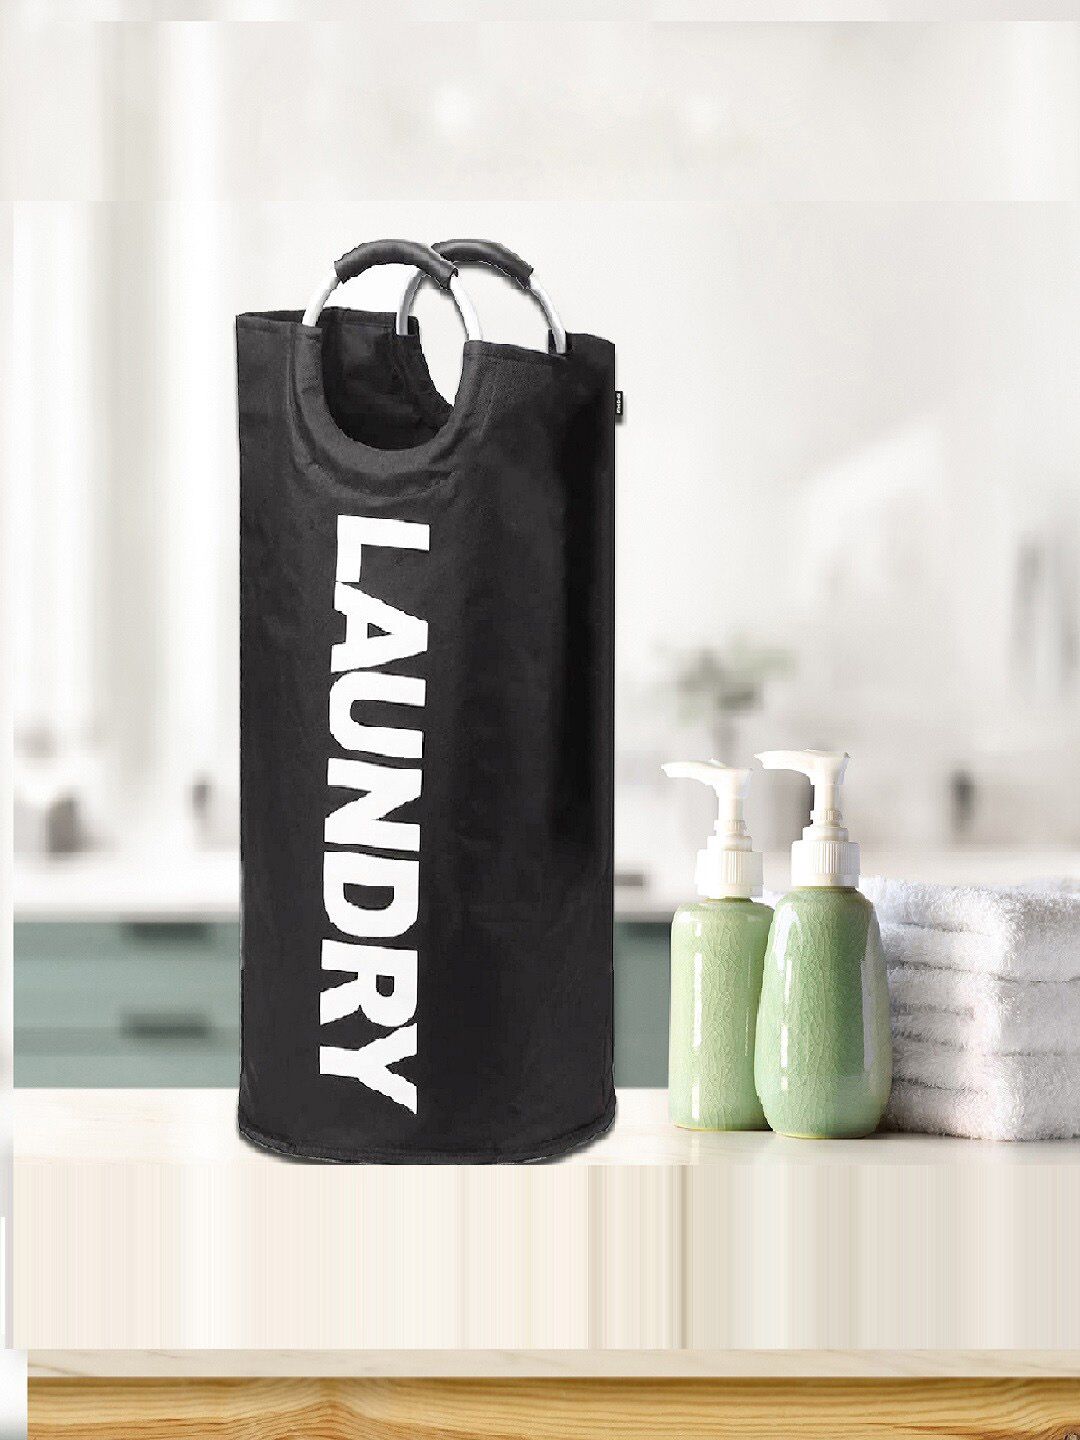 Tormeti Black & White Printed Foldable Laundry Bag with Carry Handles Price in India